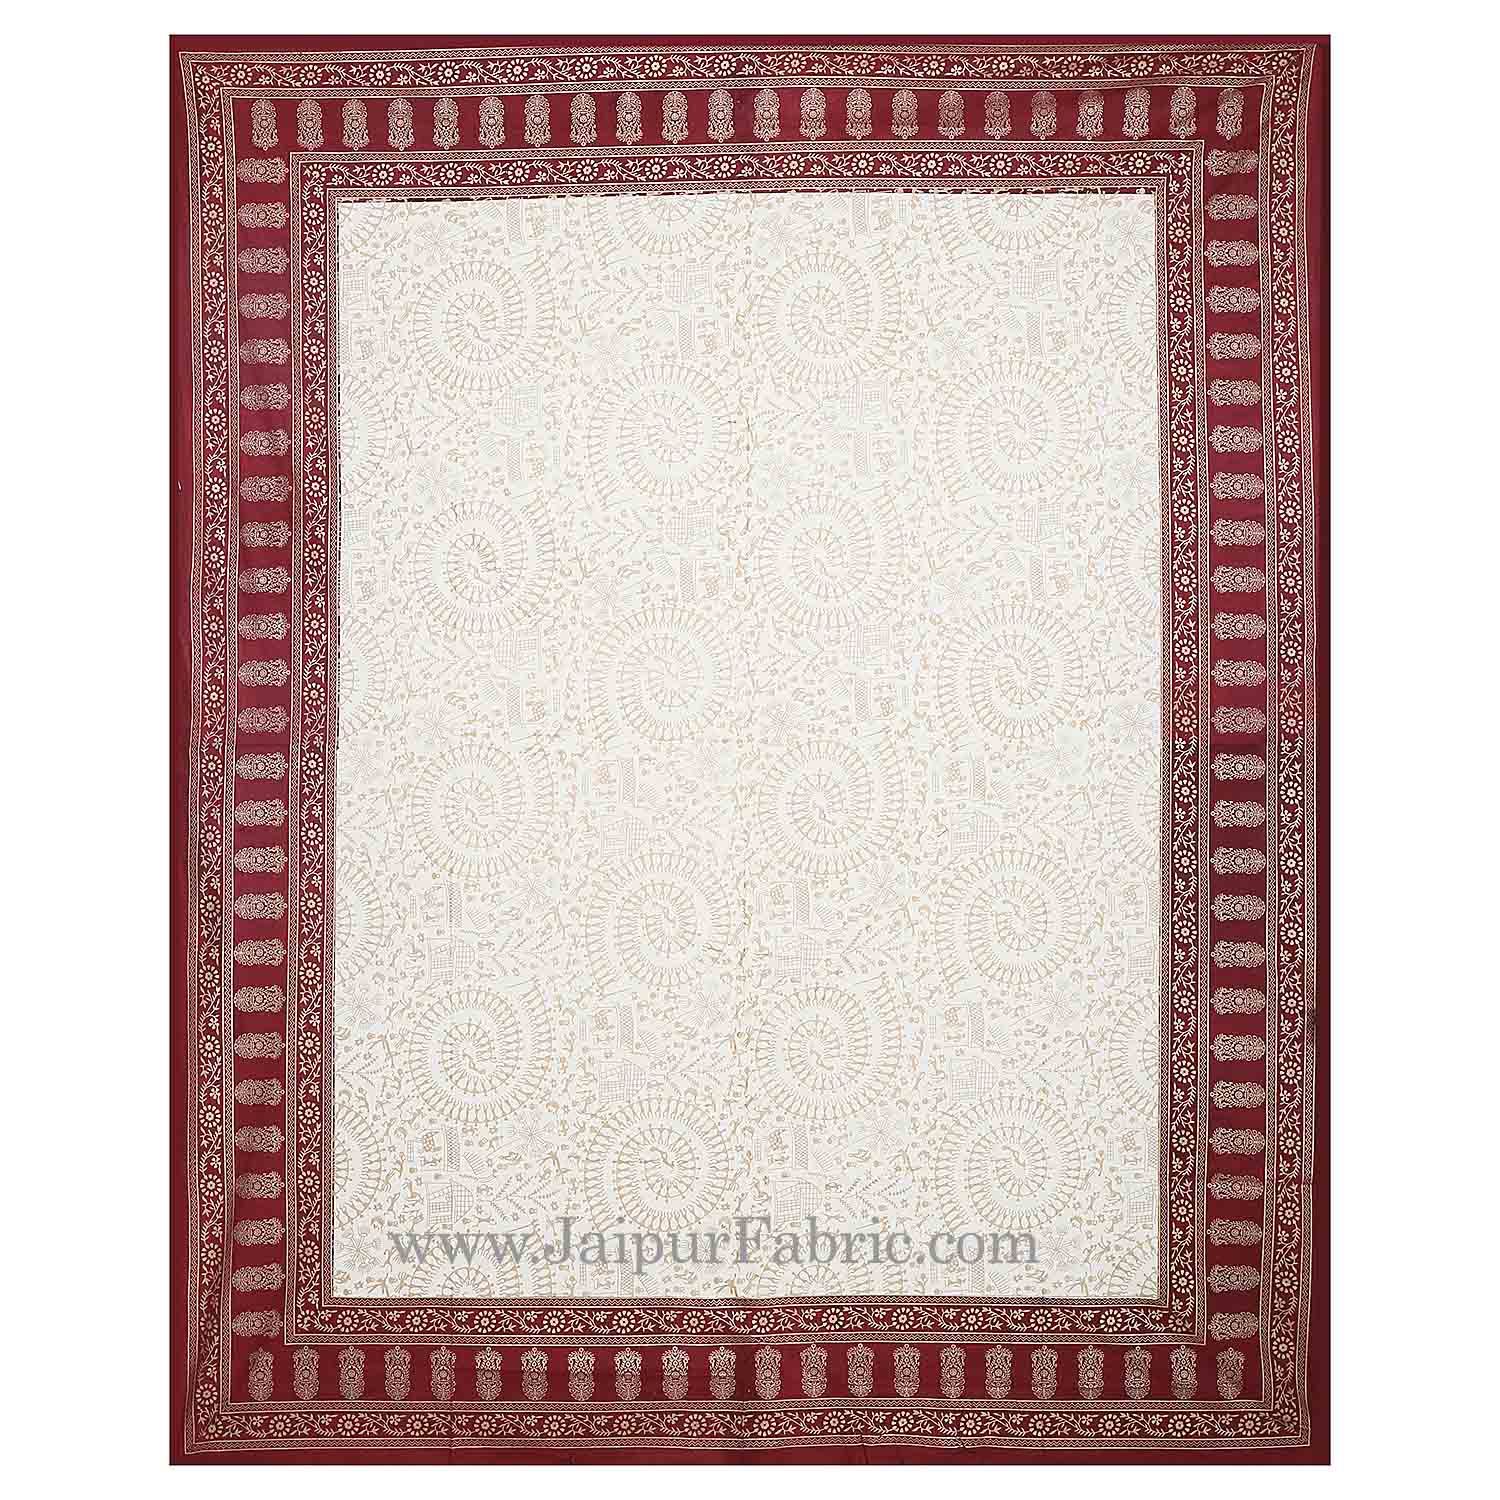 Maroon Border Cream Base With Golden Print Figure Print Super Fine Cotton Double Bed Sheet